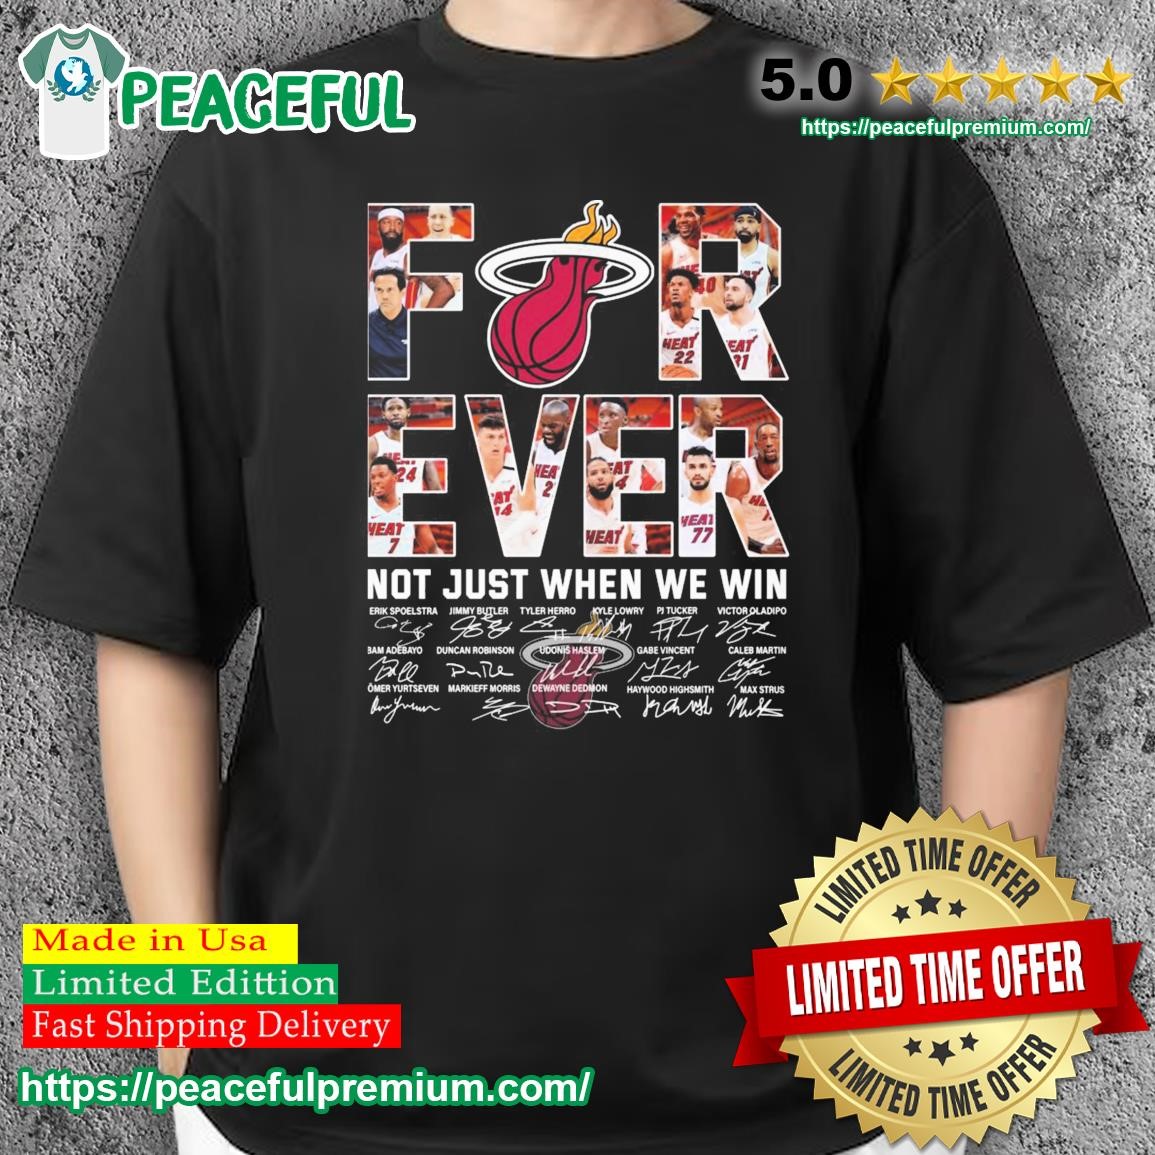 Unique Forever Not Just When We Win Miami Heat T Shirt Mens, Miami